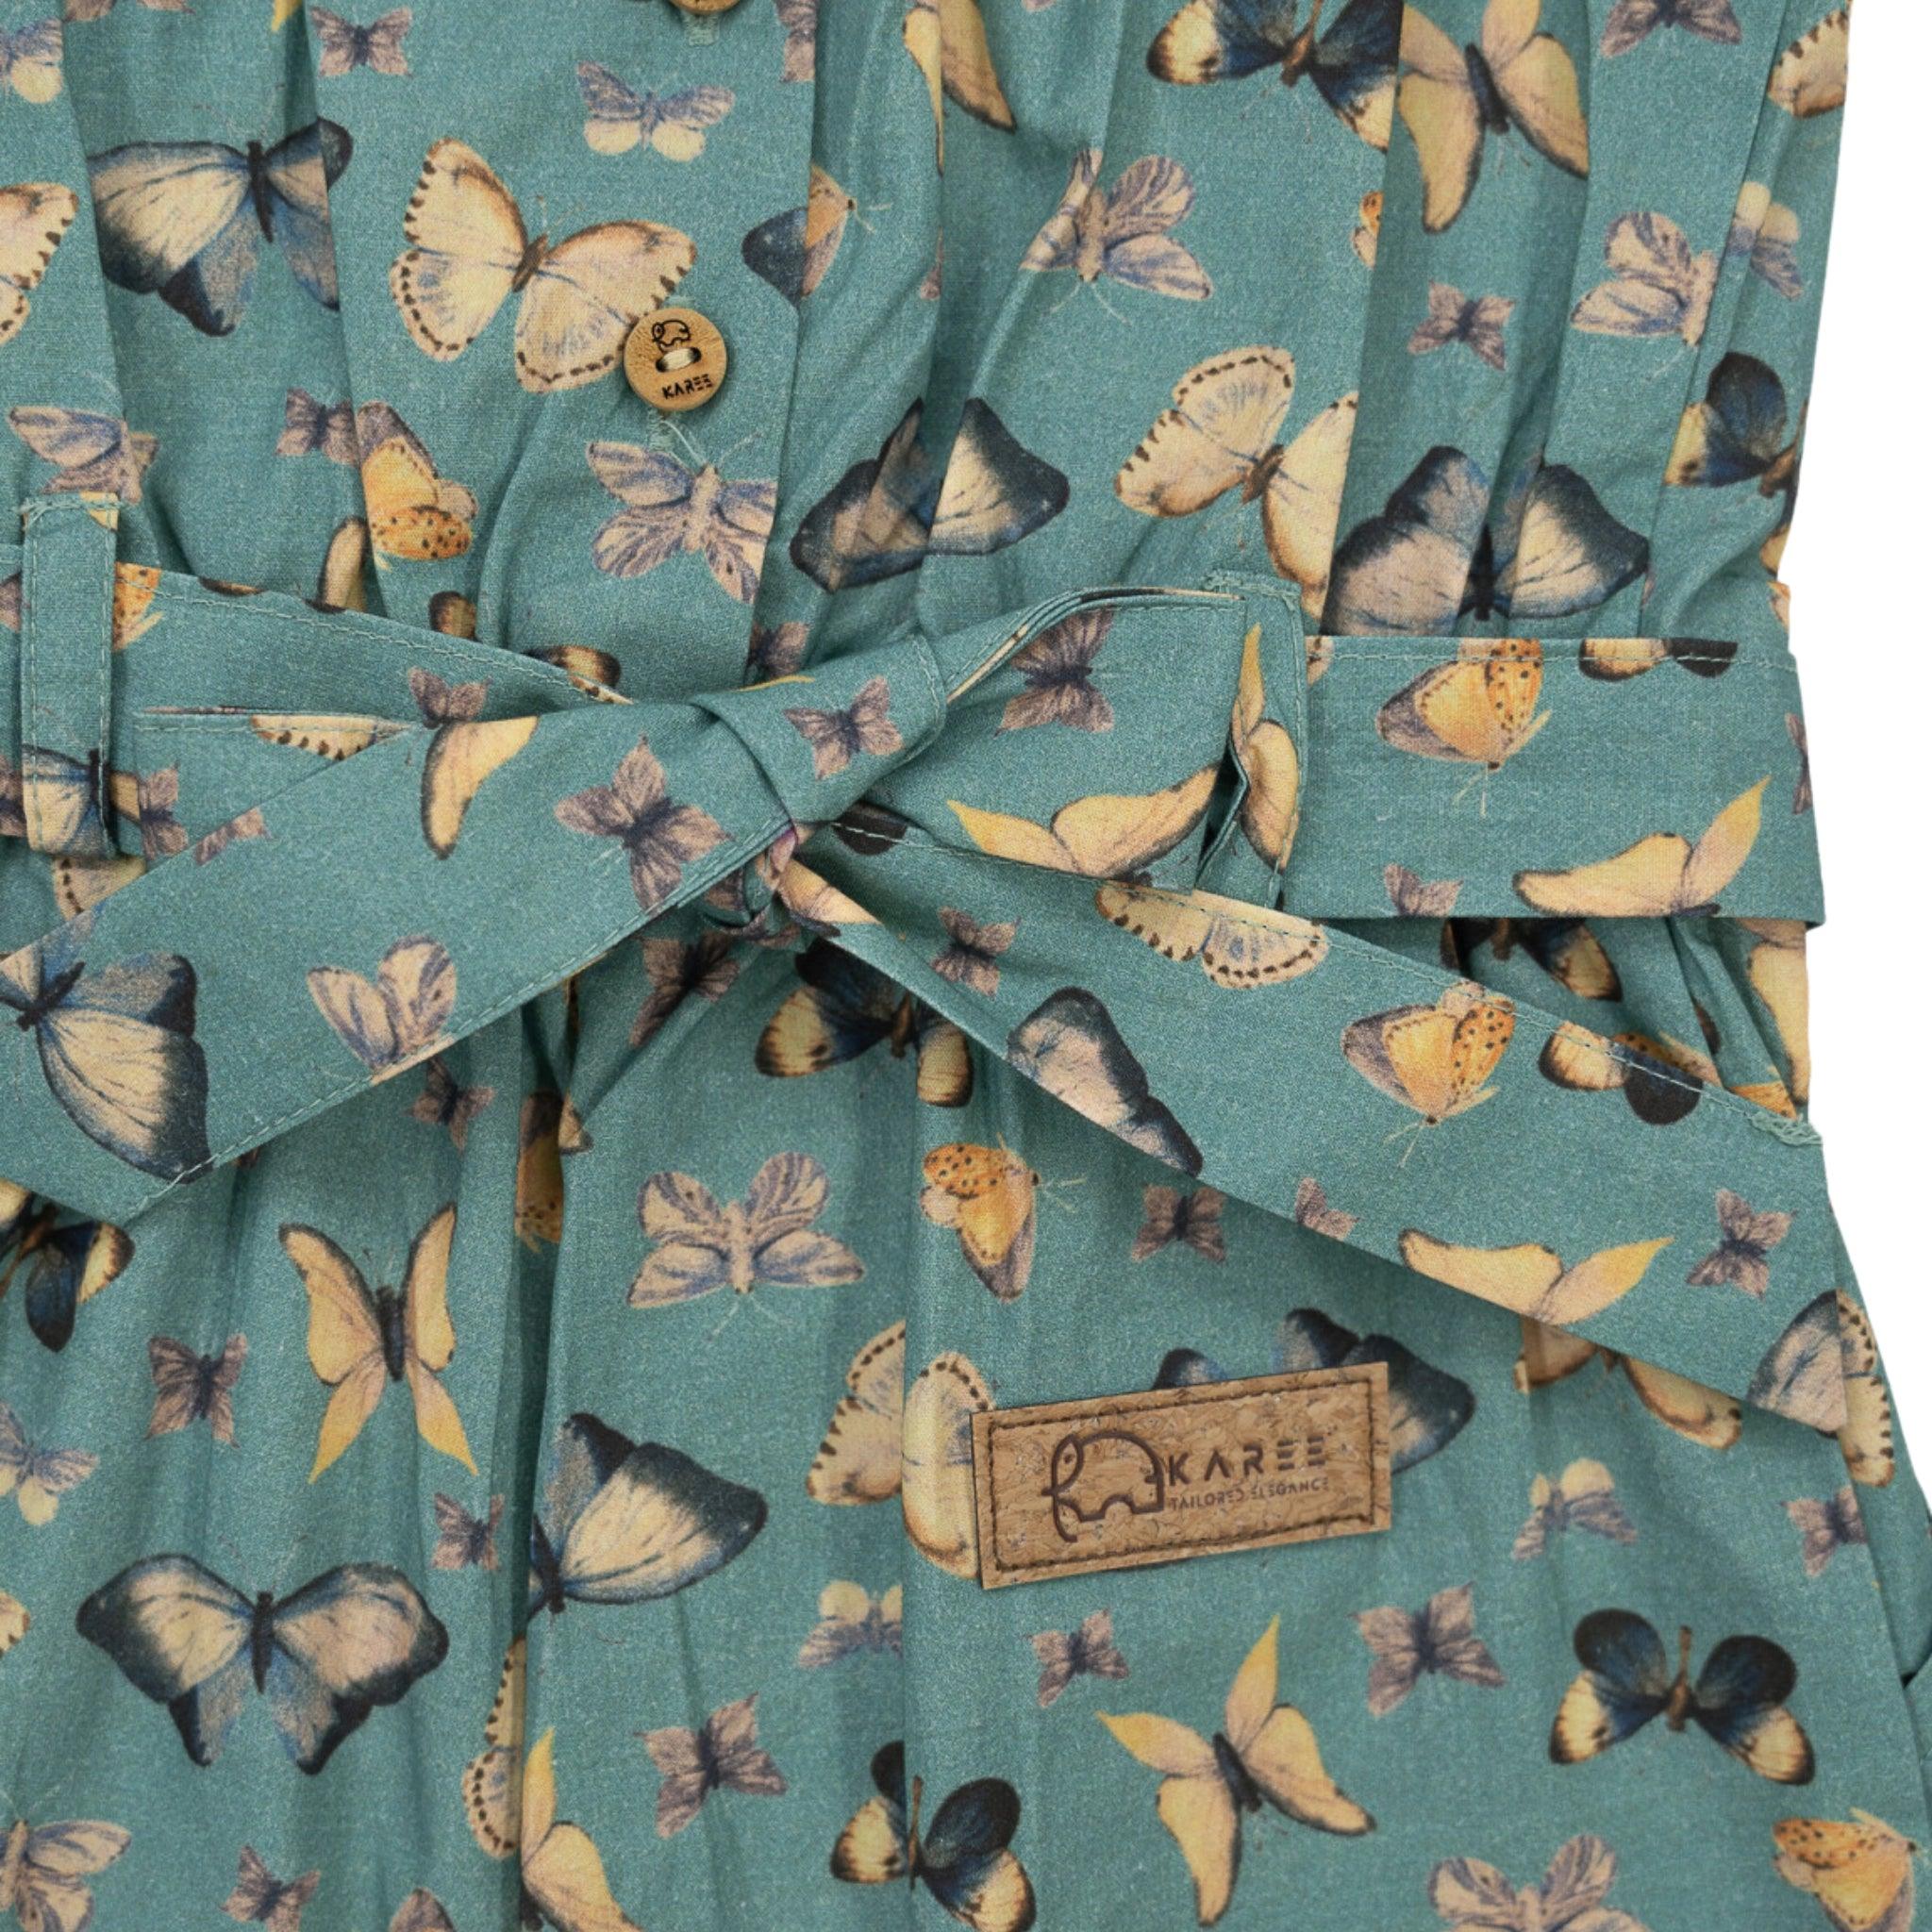 Close-up view of a Karee Blue Surf Adventure-ready Cotton Play Suit with a butterfly print, featuring a bow and a brand label stitched on.